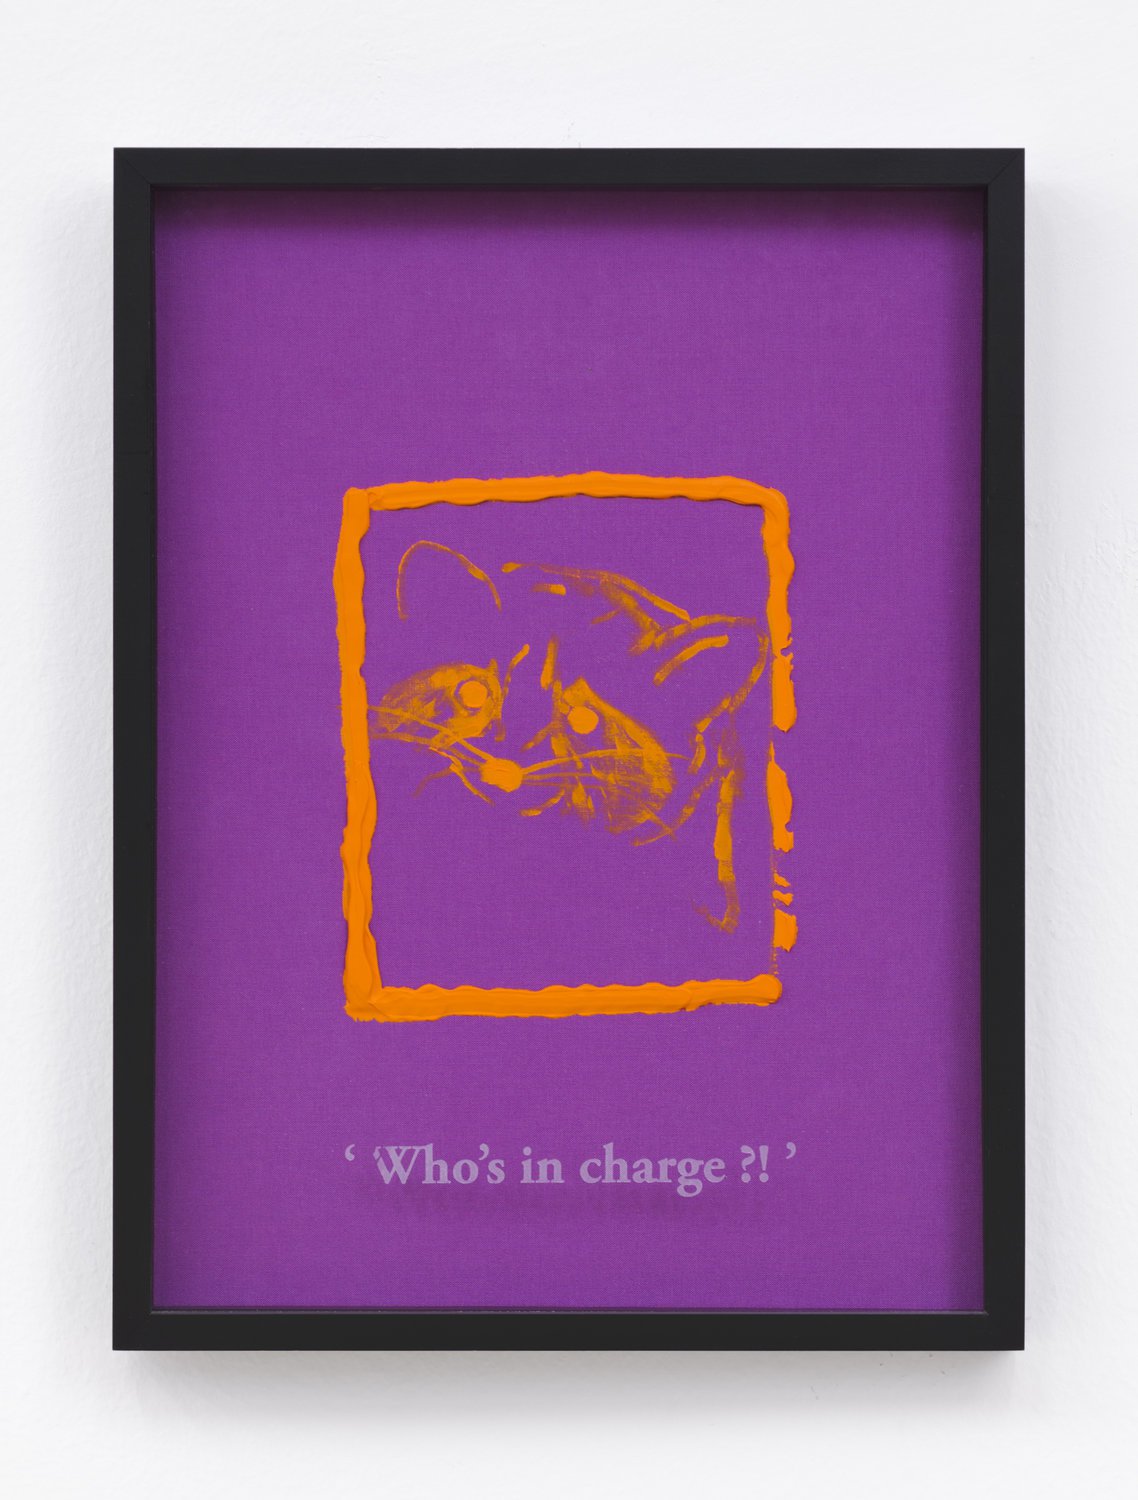 Philipp Timischl&#x27;Who&#x27;s in charge?!&#x27; (Magenta/Cadmium Yellow Light), 2017Acrylic on linen and glass-engraved object frame40.1 x 32.1 cm